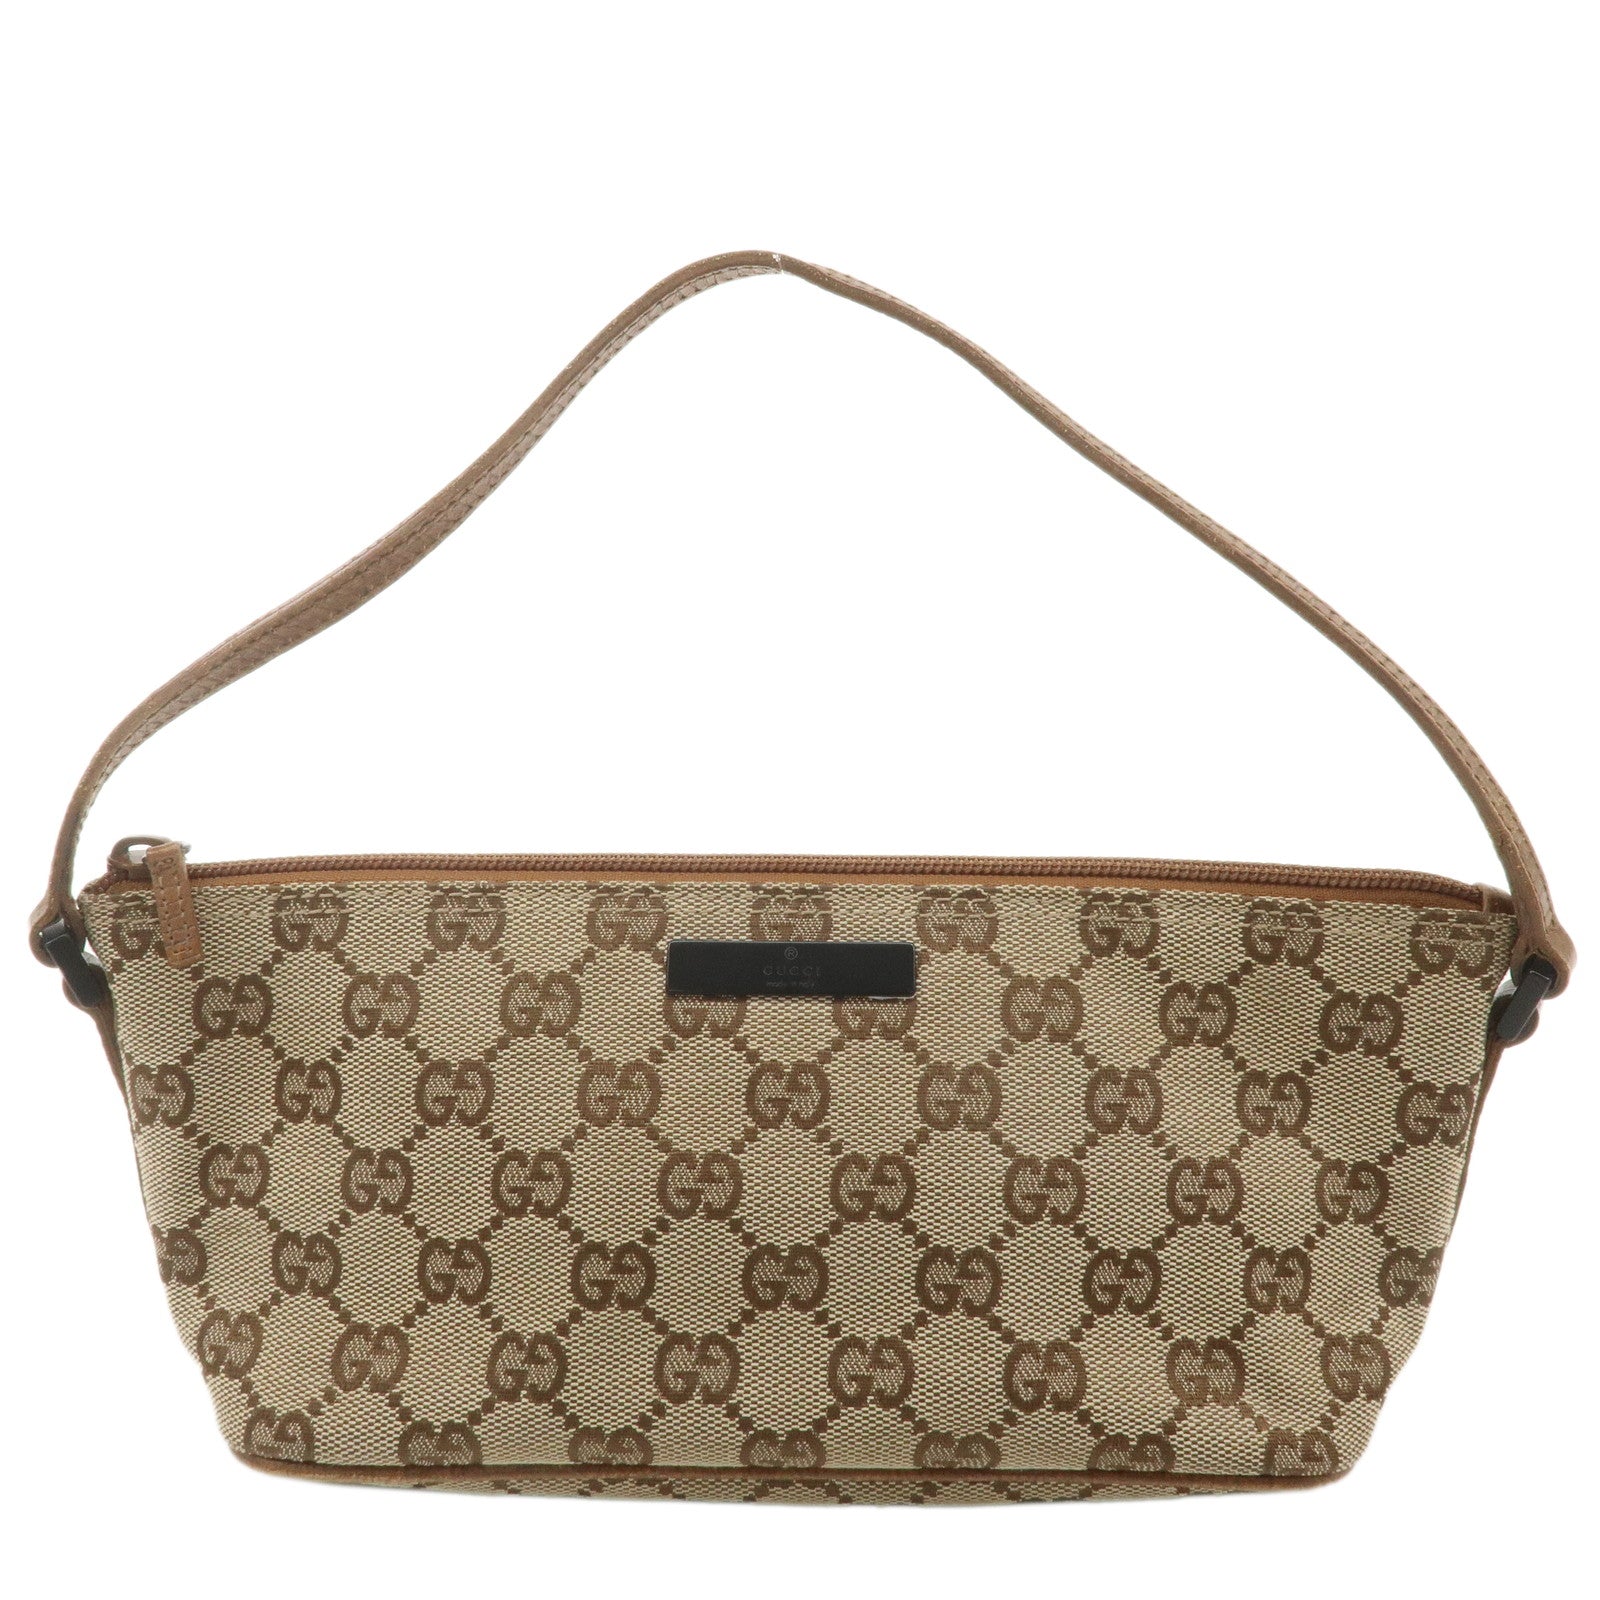 GUCCI-GG-Canvas-Leather-Boat-Bag-Hand-Bag-Pouch-Beige-Brown-7198